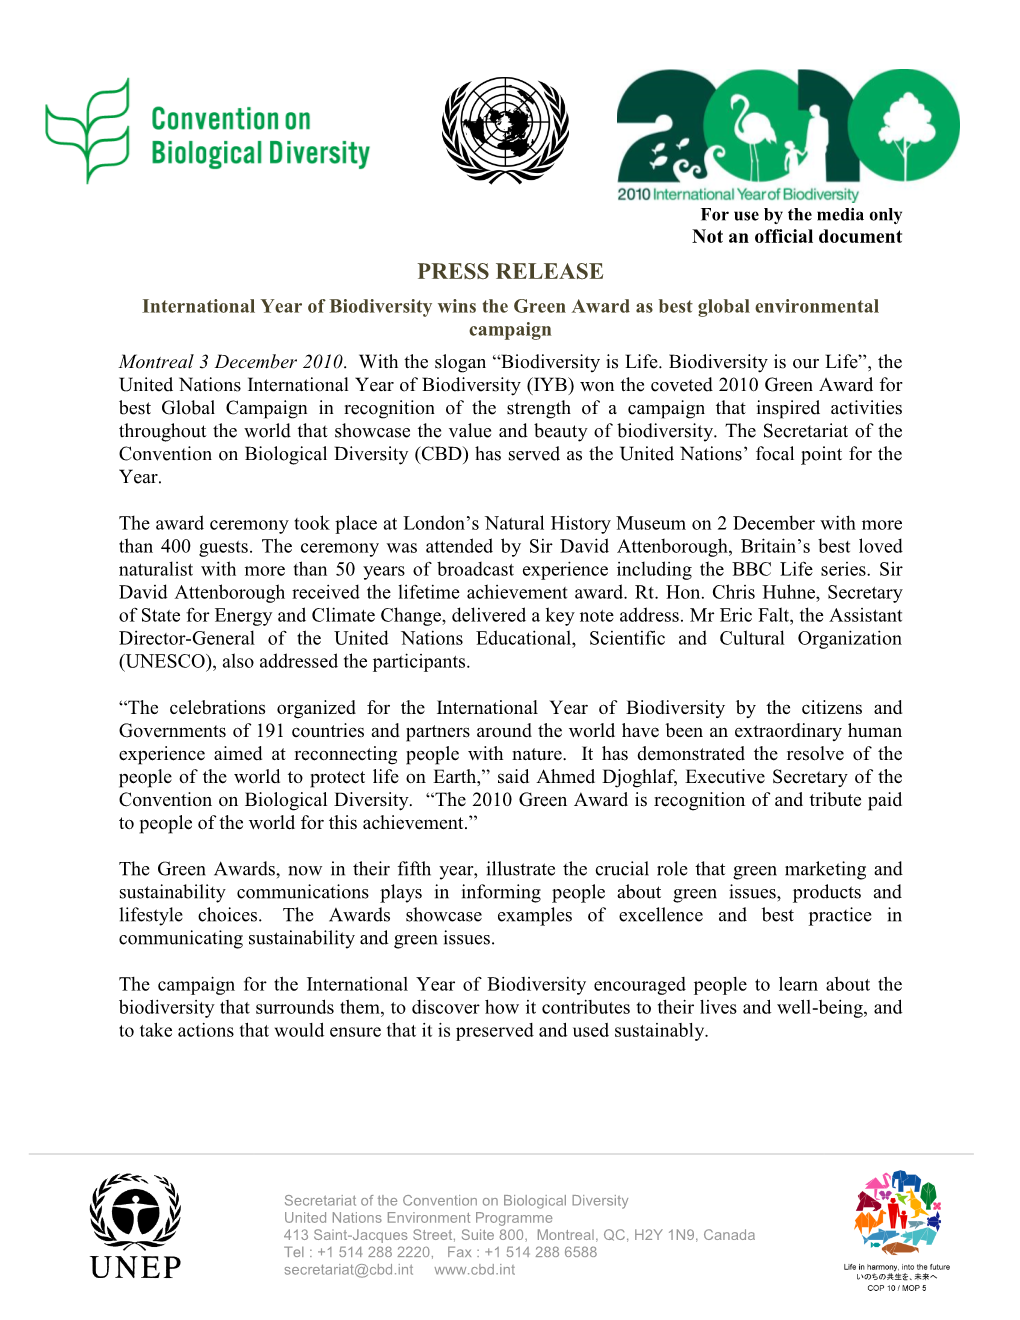 PRESS RELEASE International Year of Biodiversity Wins the Green Award As Best Global Environmental Campaign Montreal 3 December 2010